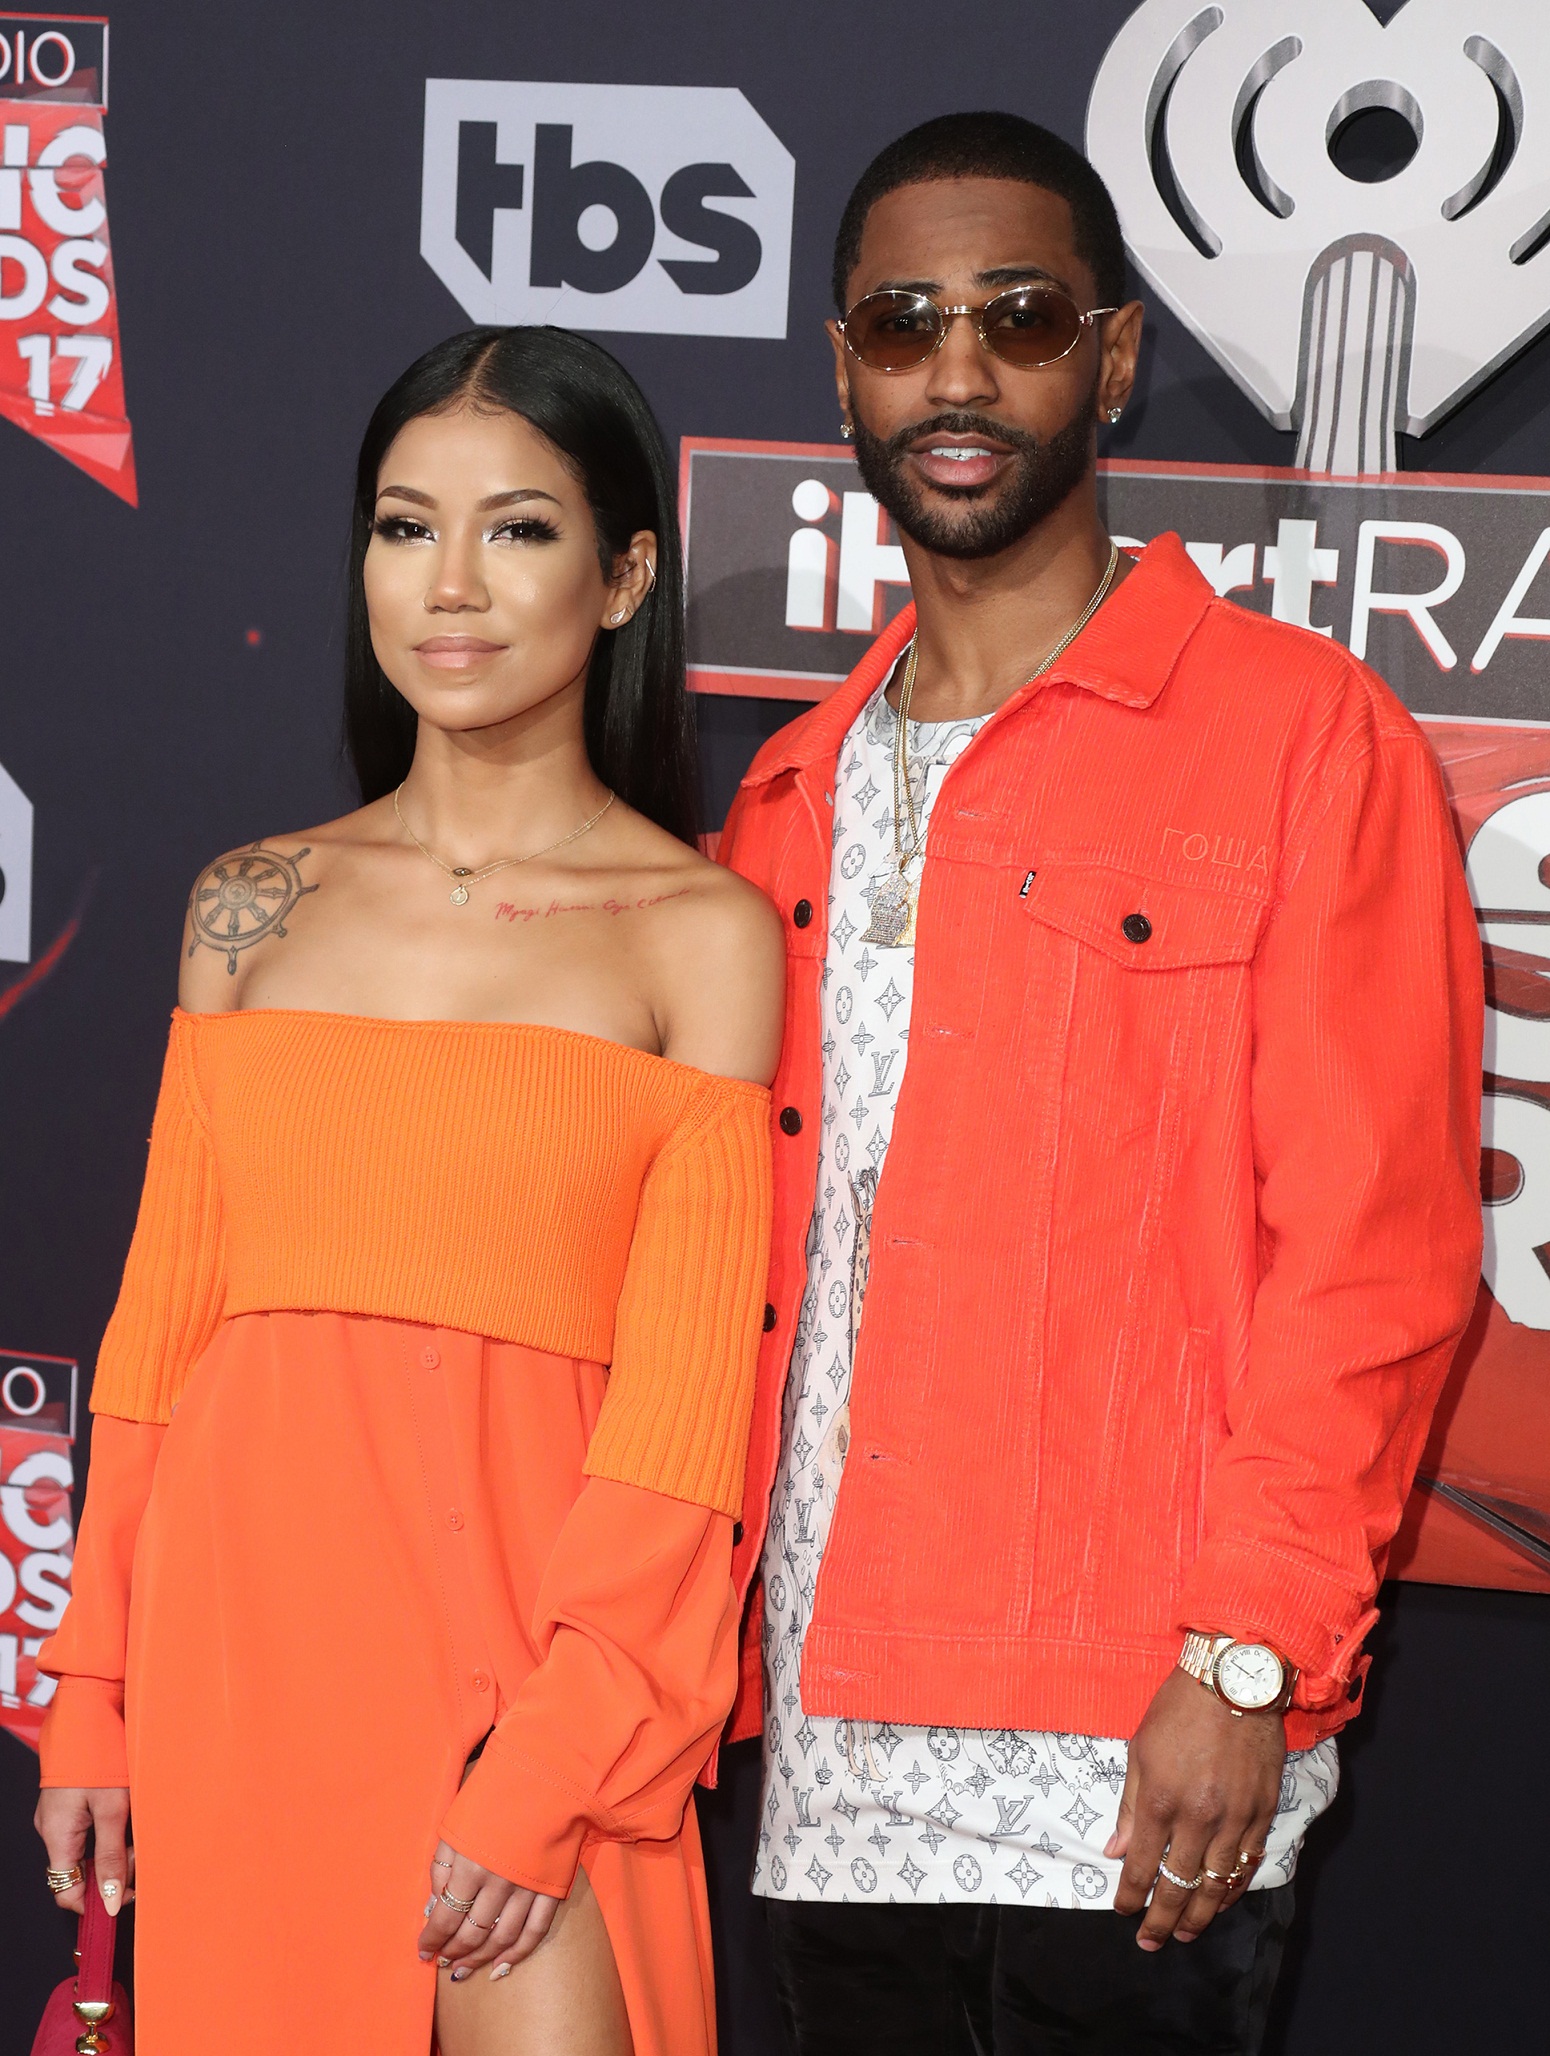 Jhene Aiko gets her Big Sean tattoo covered replacing it with a Dragon and  a Phoenix On Twitter Jhene says she covered ALL her tattoos and NO  BEEF but fans celebrate her